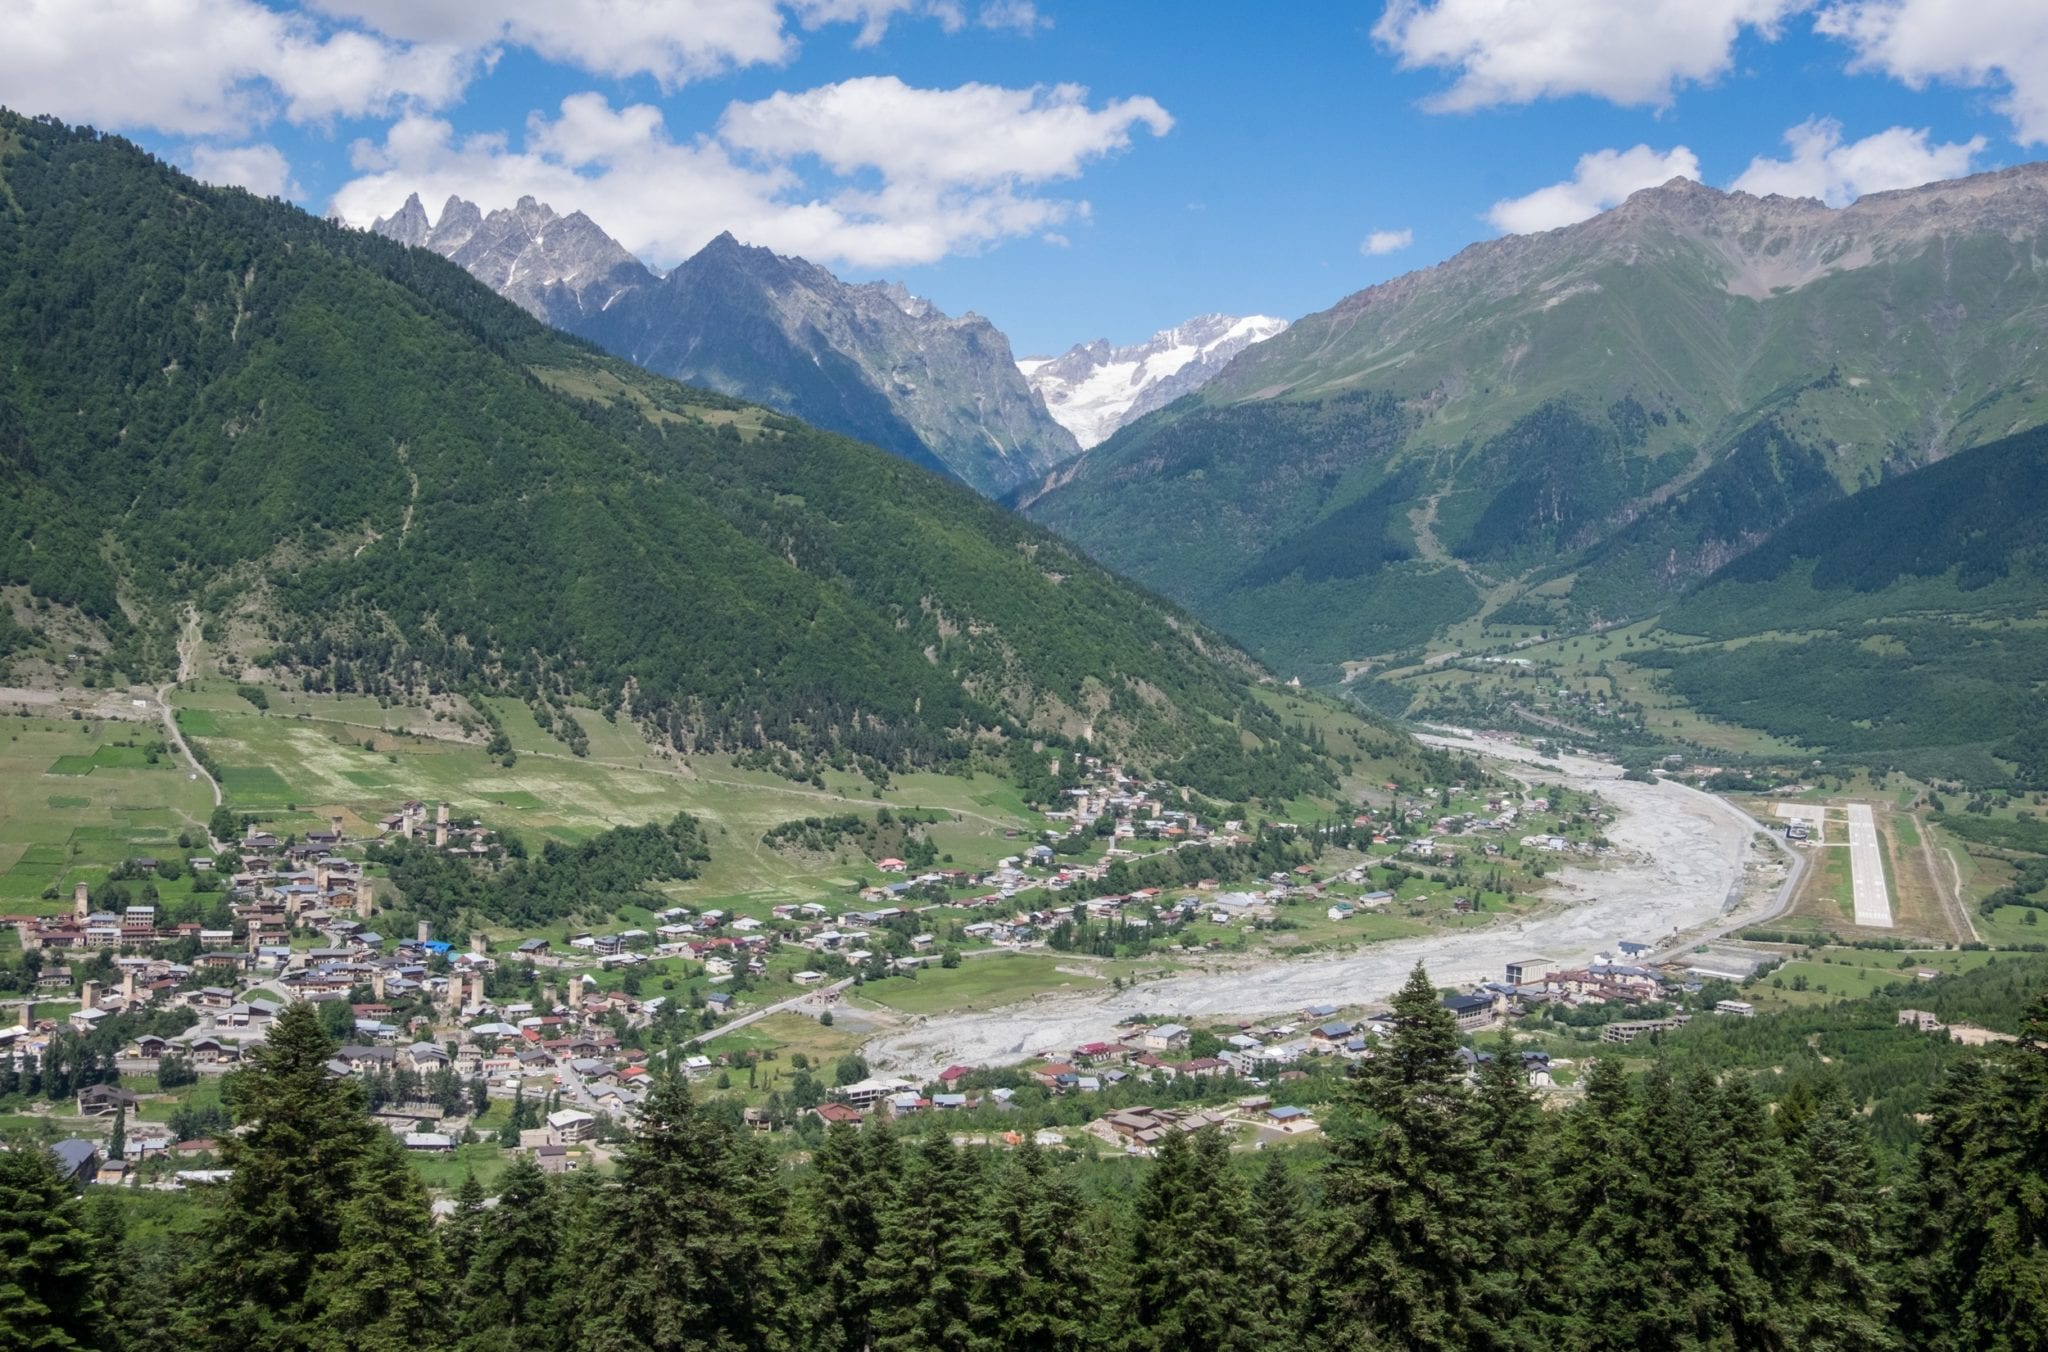 A view over the town of Mestia in Svaneti -- huge mountains underneath a blue sky; evergreen trees along the bottom, and a village full of stone towers.